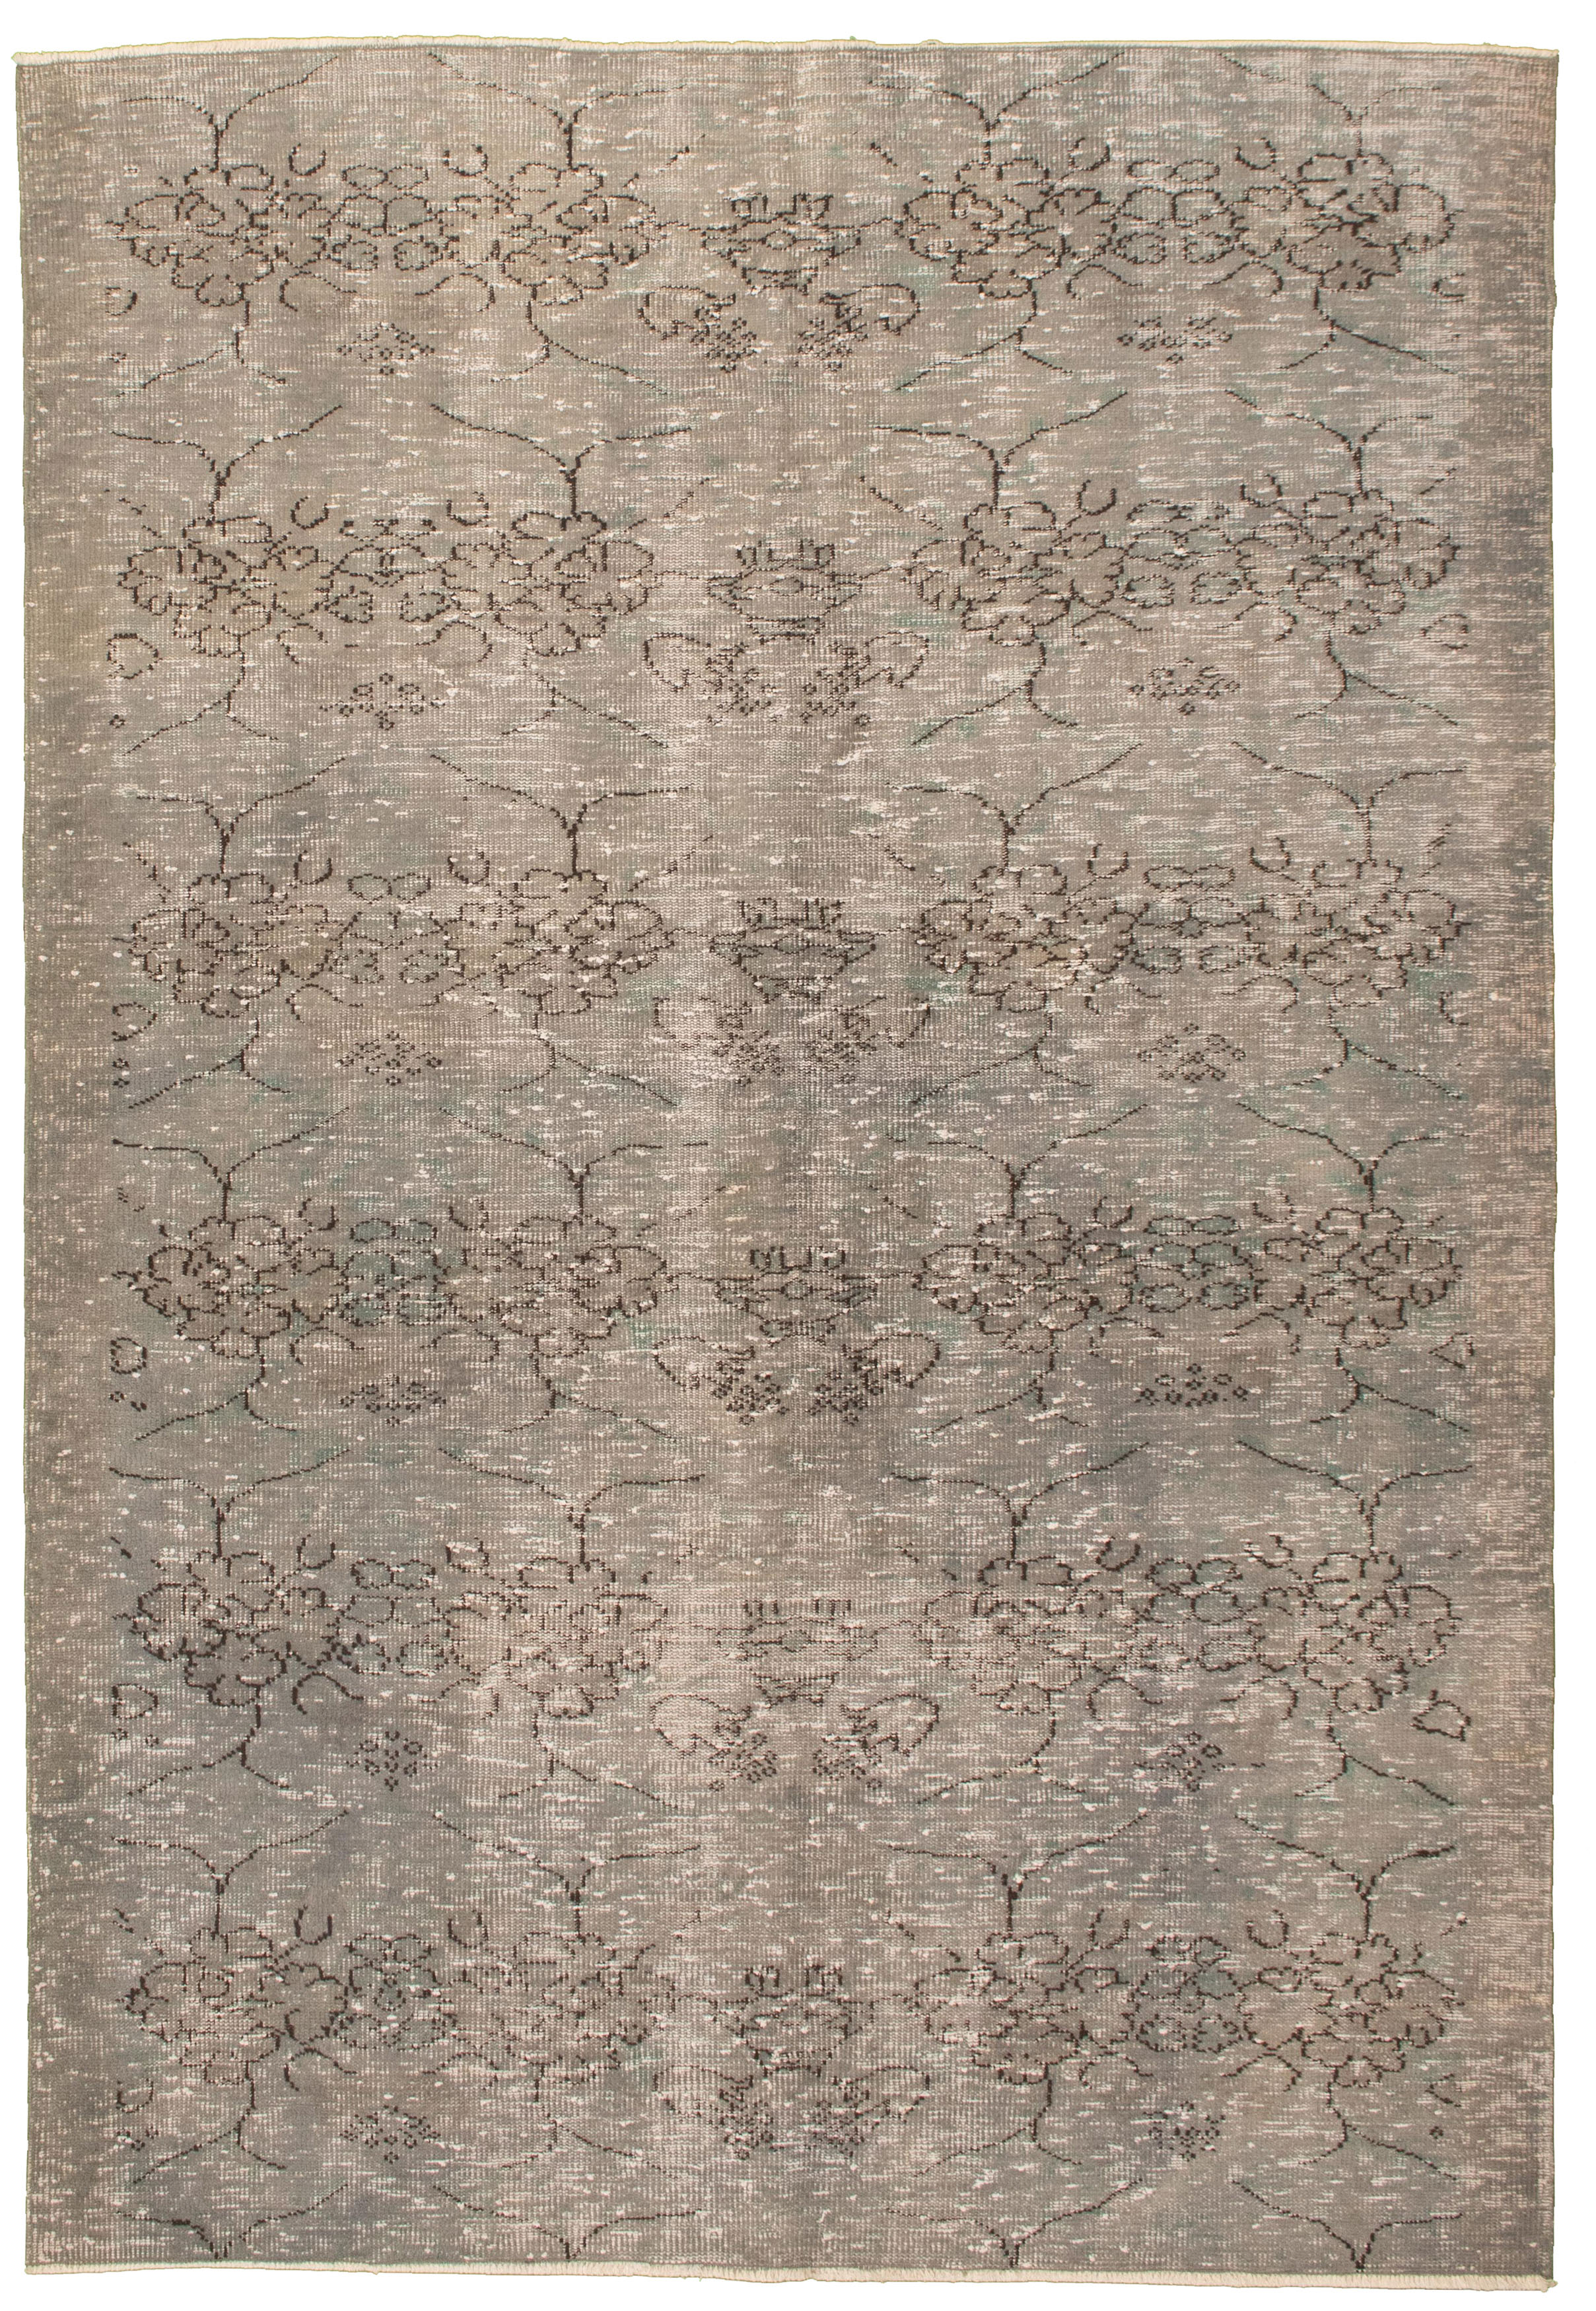 Hand-knotted Color Transition Grey Wool Rug 9'1" x 6'2" Size: 9'1" x 6'2"  